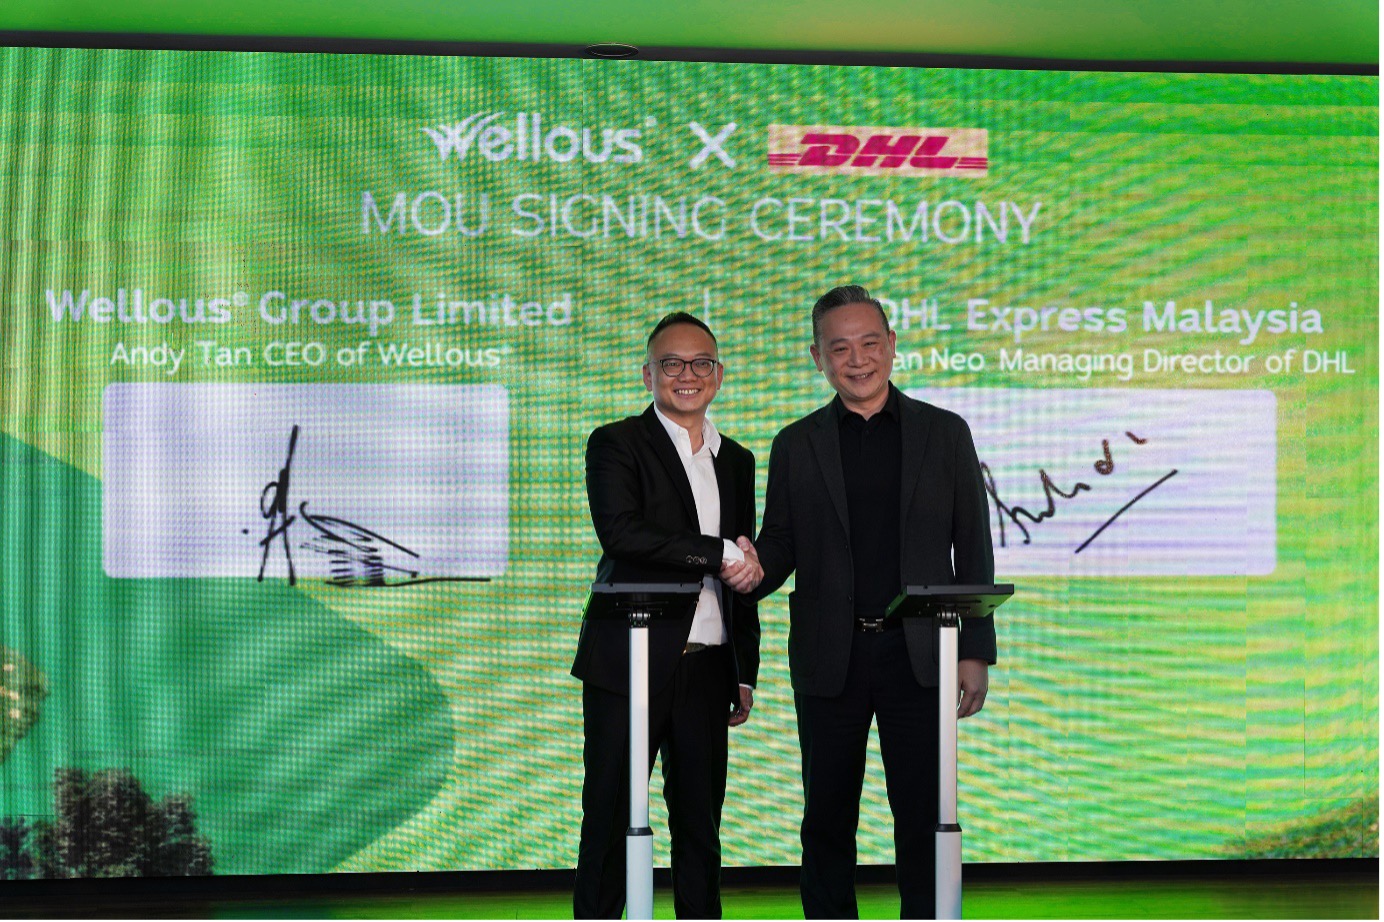 (Image: Wellous’ co-founder, Andy Tan; Julian Neo, Managing Director of DHL Express Malaysia and Brunei.)